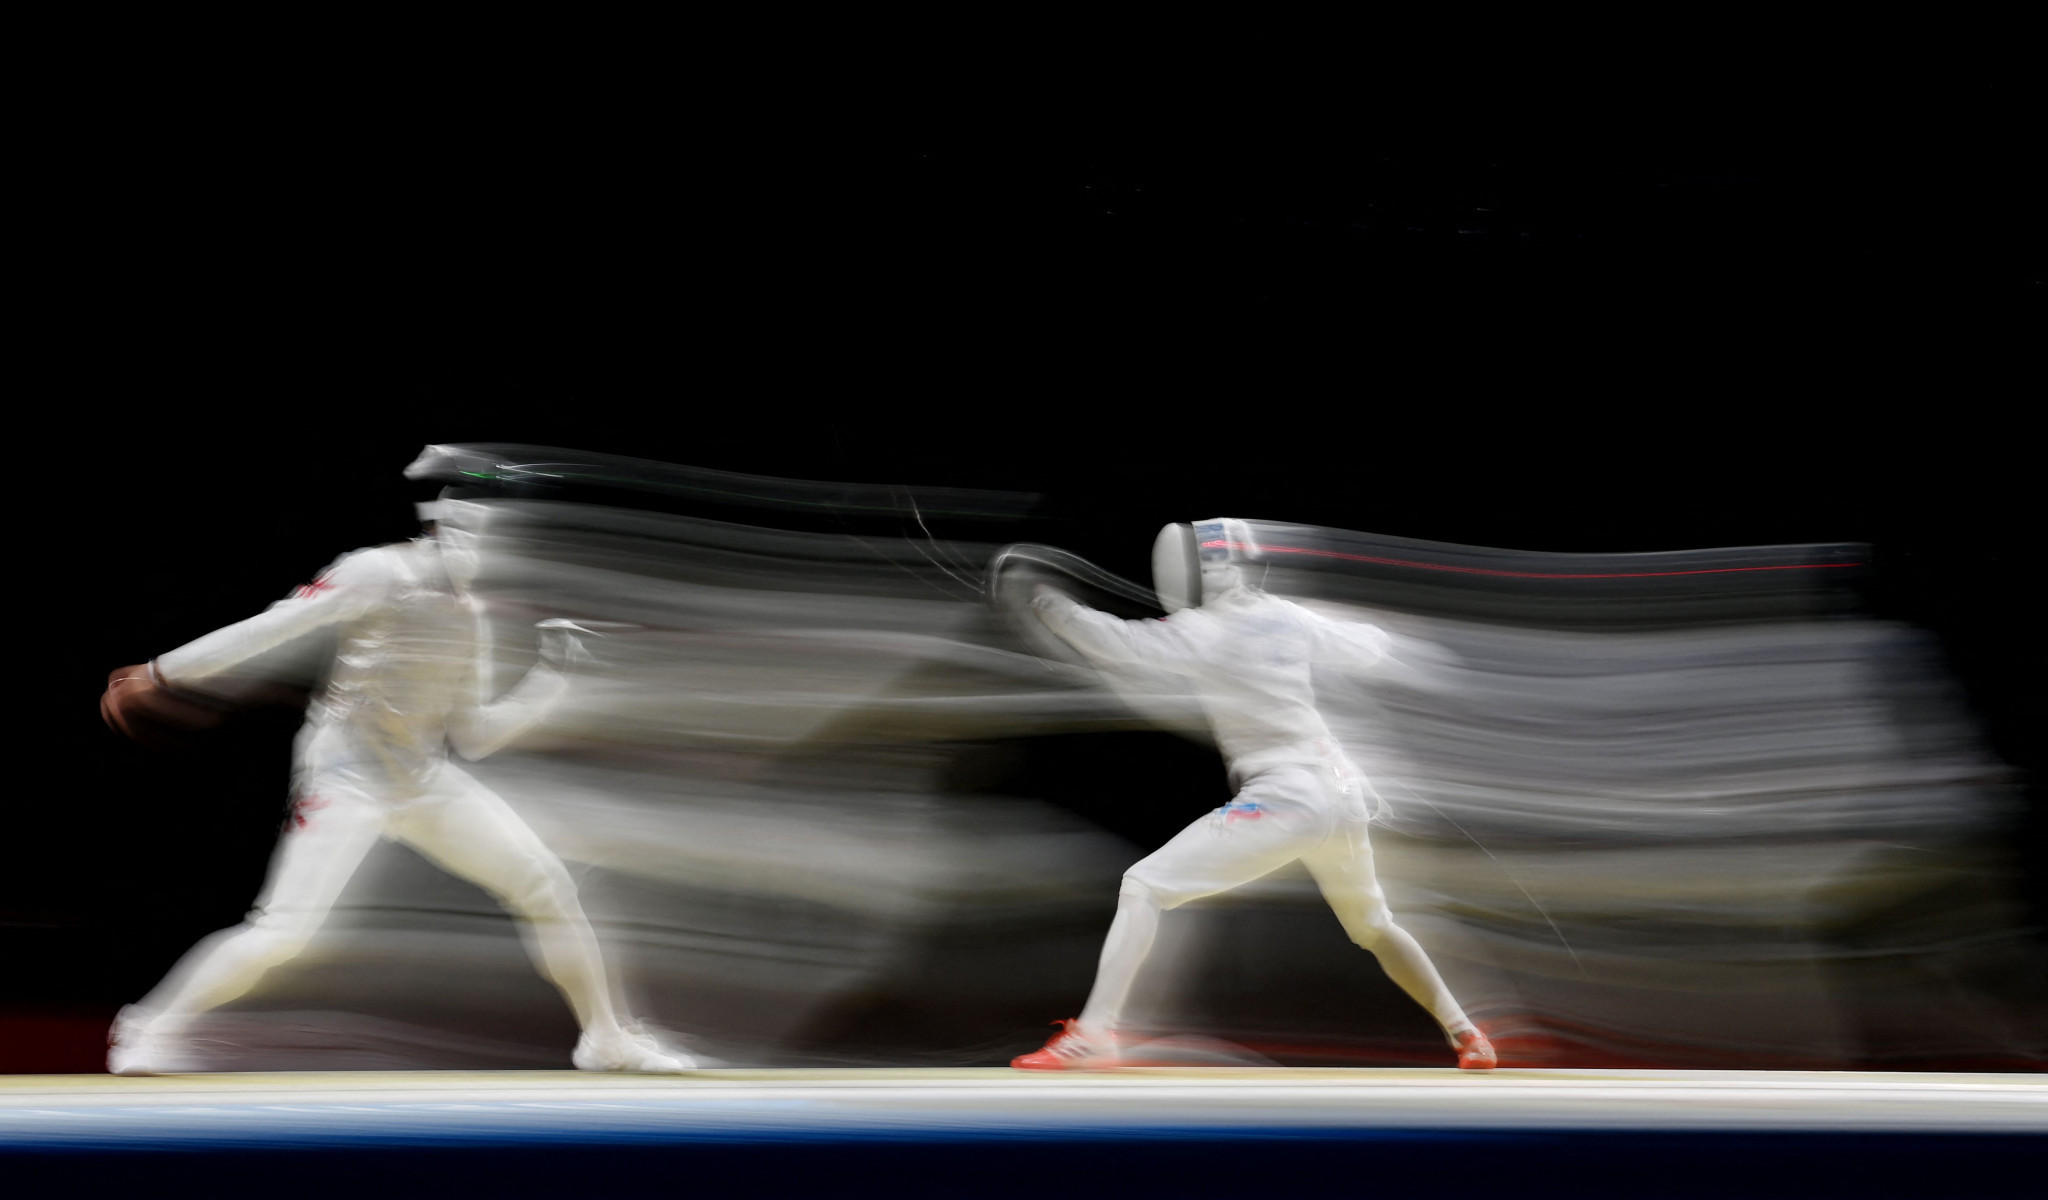 At least three withdrawals to avoid facing Israeli opposition have been reported from the Junior and Cadet Fencing World Championships ©Getty Images 